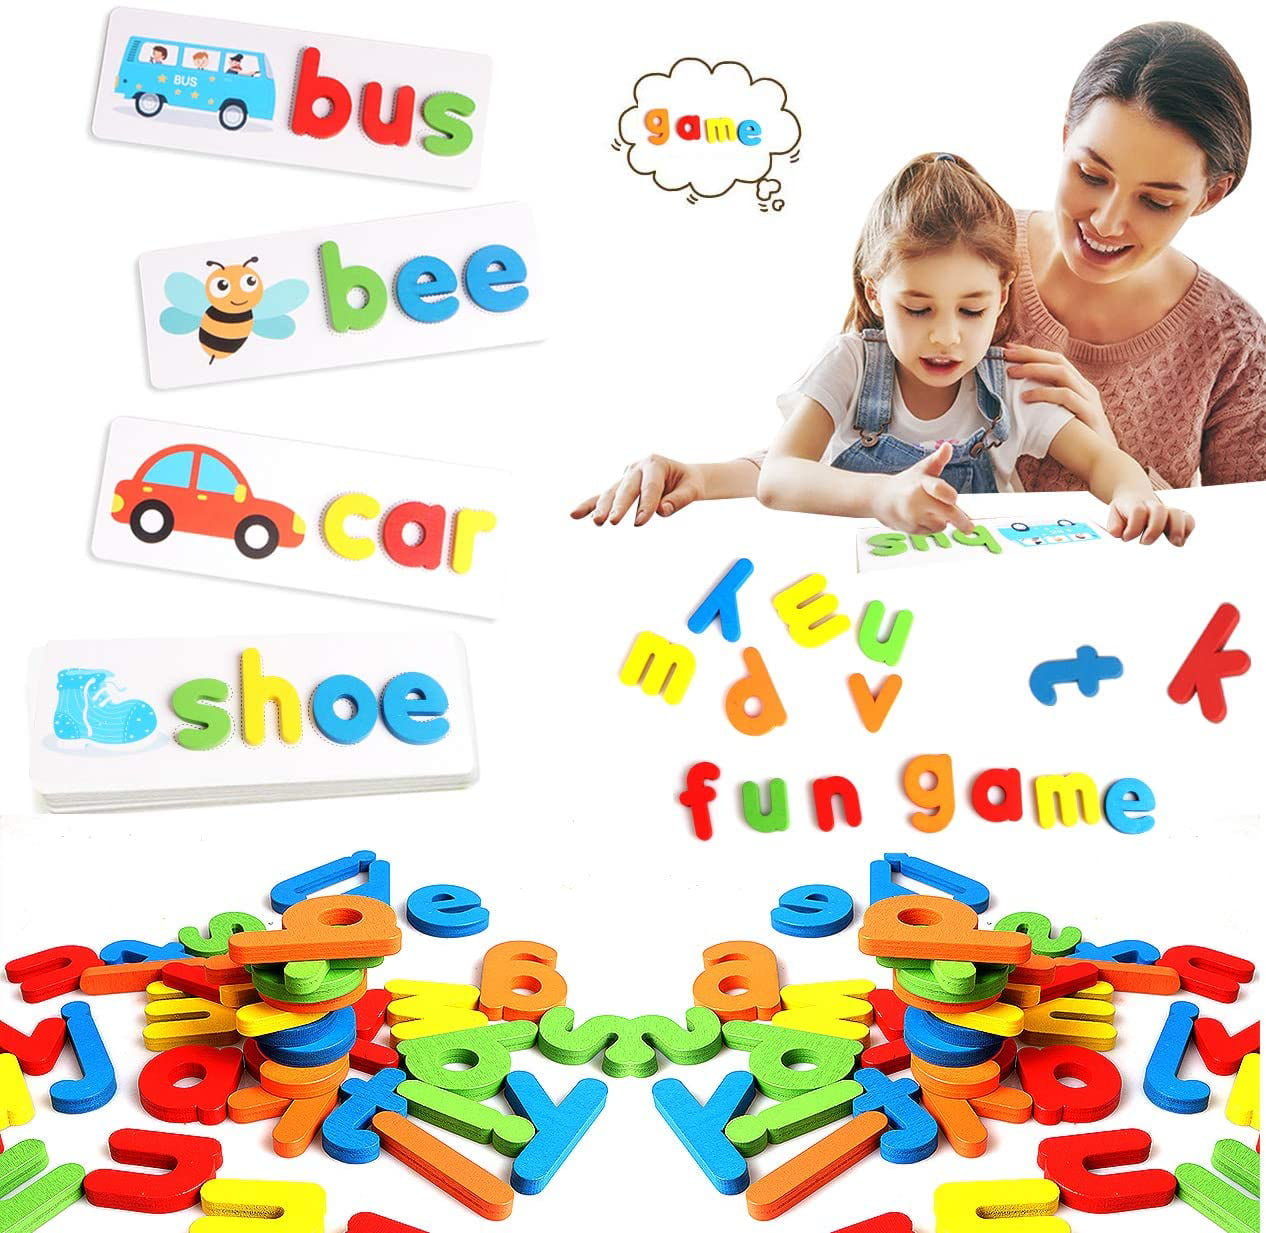 ABC Alphabet Flash Cards Preschool Kids Matching Wooden Learning Letters Toys Toddler Sight Words Flashcards Game